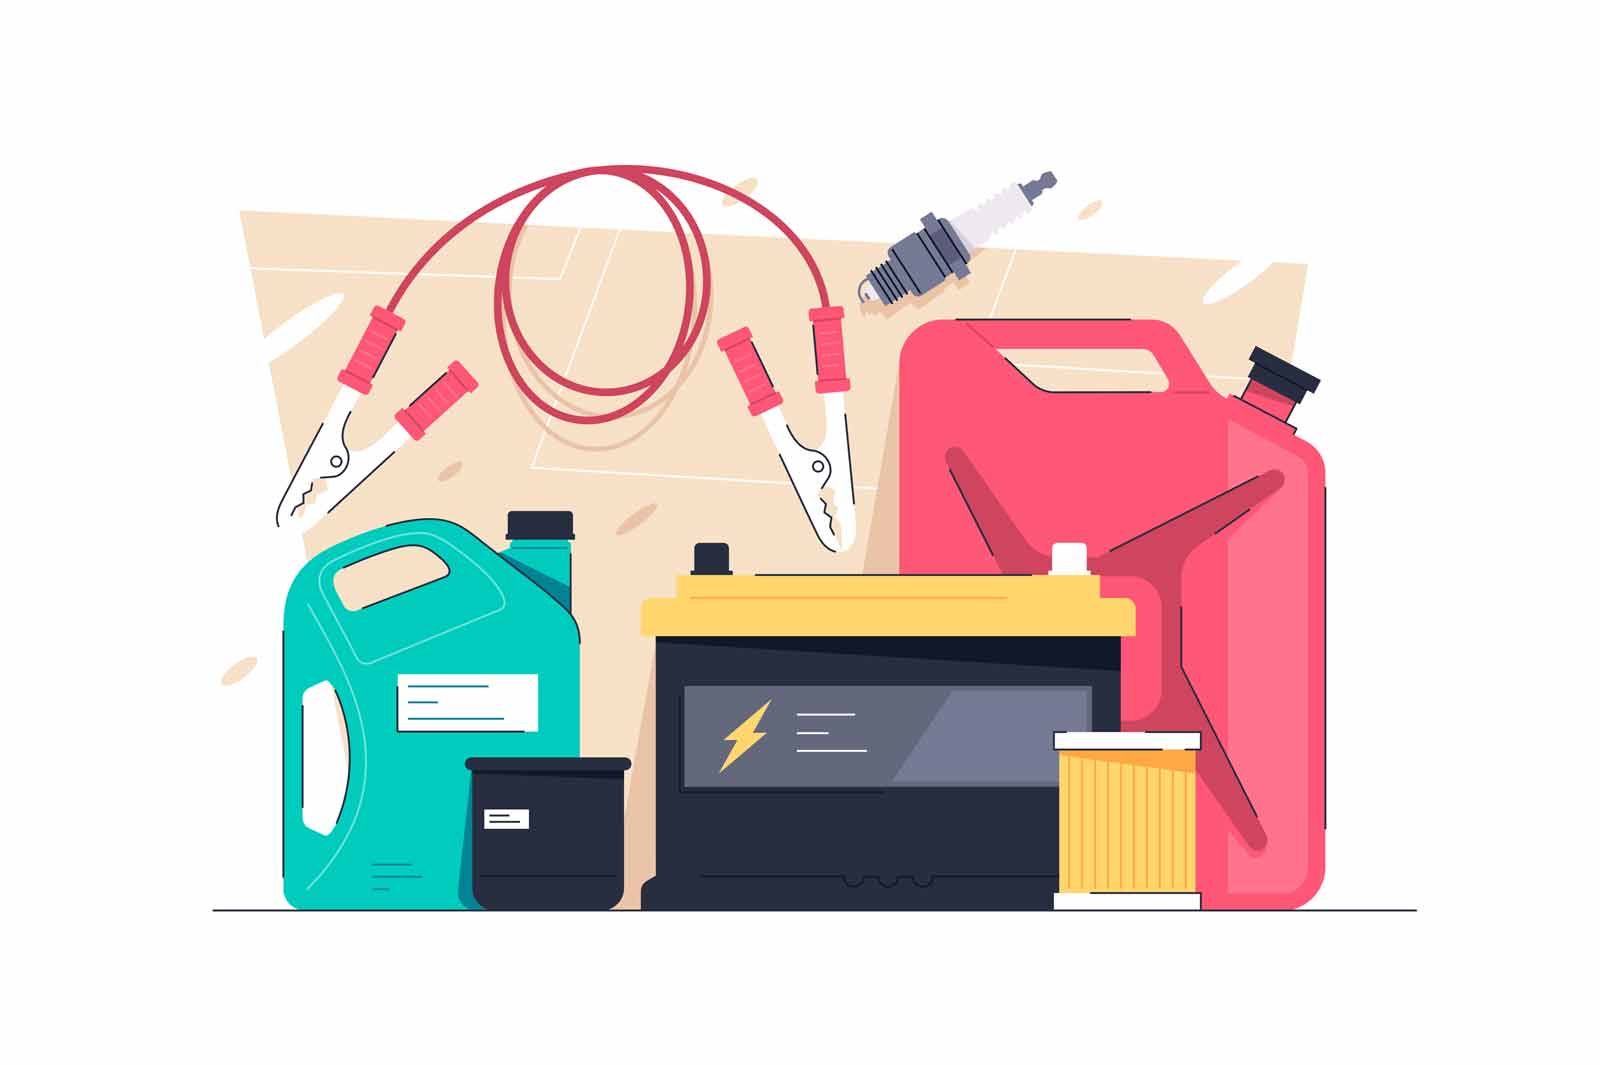 Set of tools needed for car repair unexpectedly vector illustration. Essential tool kit in car flat style. Car maintenance, pit stop concept